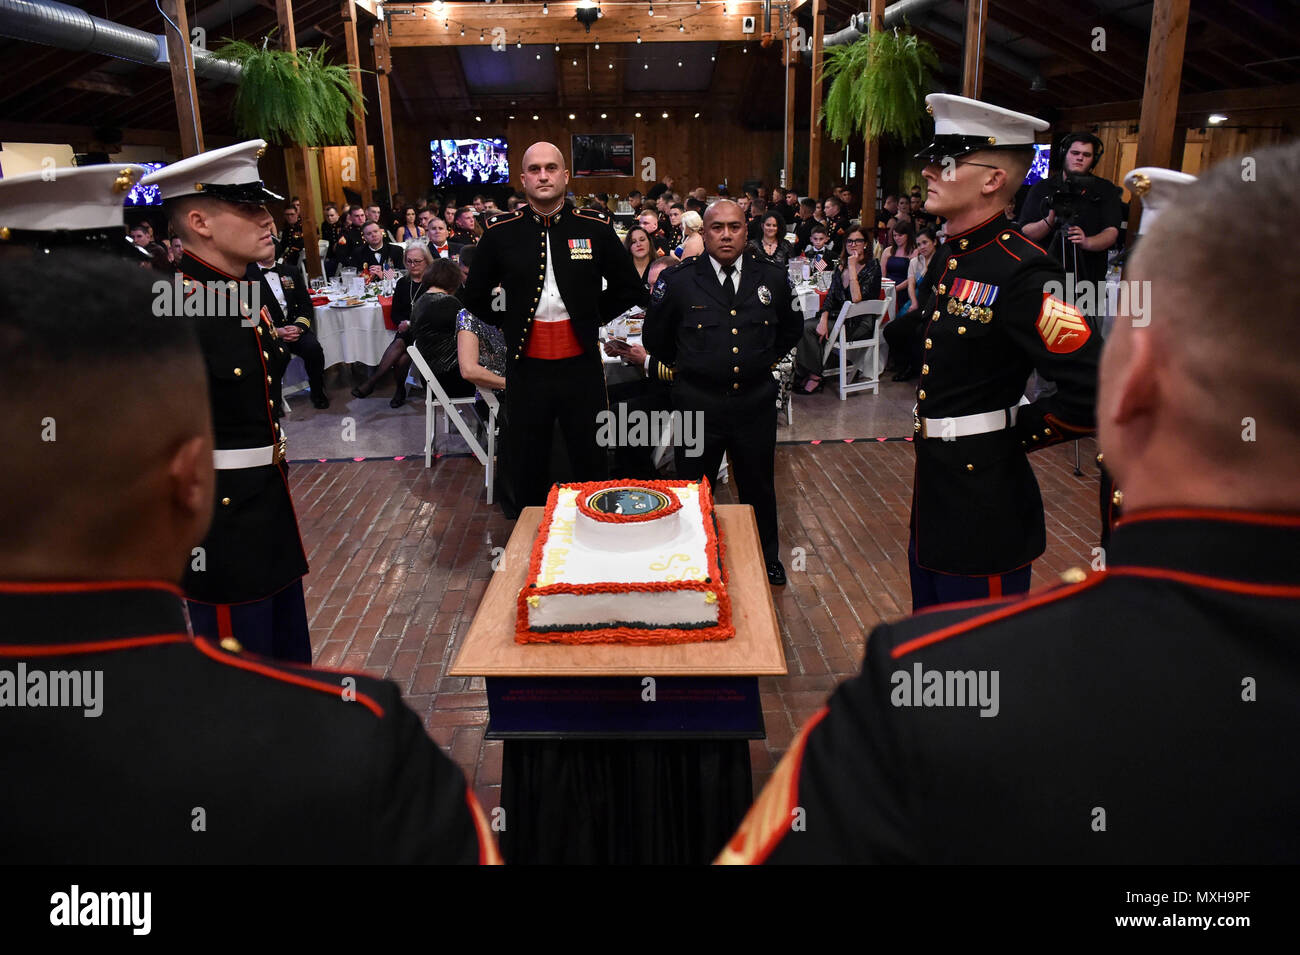 161104-N-OO032-146 POULSBO, Wash. (Nov. 4, 2016) Cake escorts present the birthday cake to Marine Corps Security Force Battalion (MCSFBn) -Bangor commanding officer Lt. Col. Scott Reed, a native of Olean, New York, and retired Marine and Navy veteran Domingo Almirol, the guest of honor and Suquamish Police Department deputy chief of patrol, during the 241st United States Marine Corps birthday ball hosted by MCSFBn at the Kiana Lodge. Maj. Gen. John Lejeune issued General Order 47 on November 1, 1921, for Marines to commemorate the establishment of the Continental Marines — November 10, 1775. ( Stock Photo